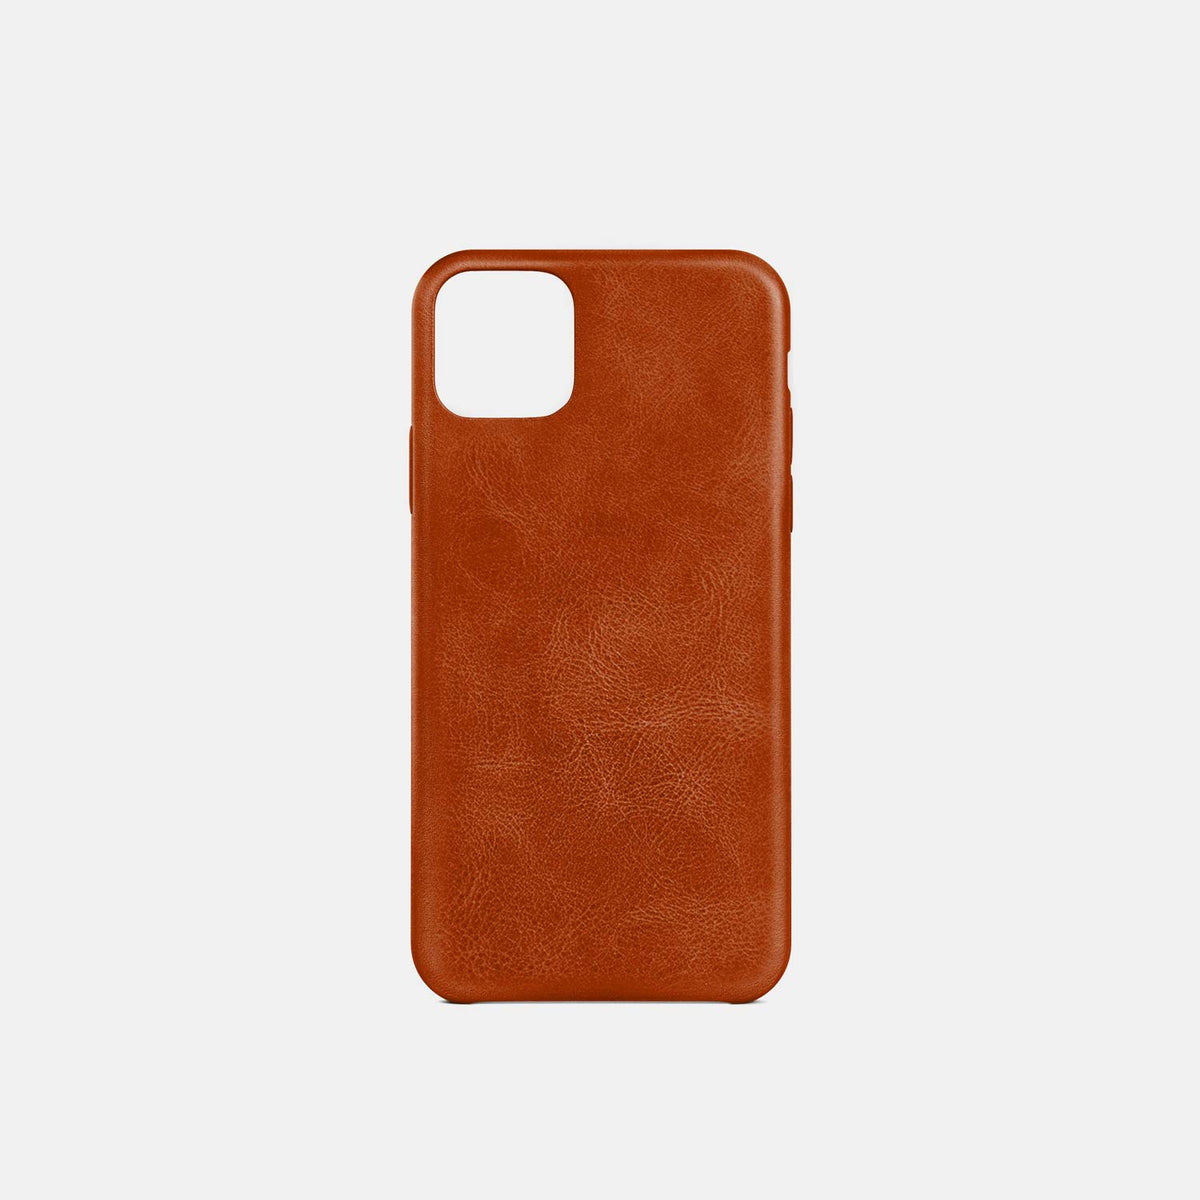 Leather iPhone 7/8 Plus Shell Case - Saddle Brown - RYAN London